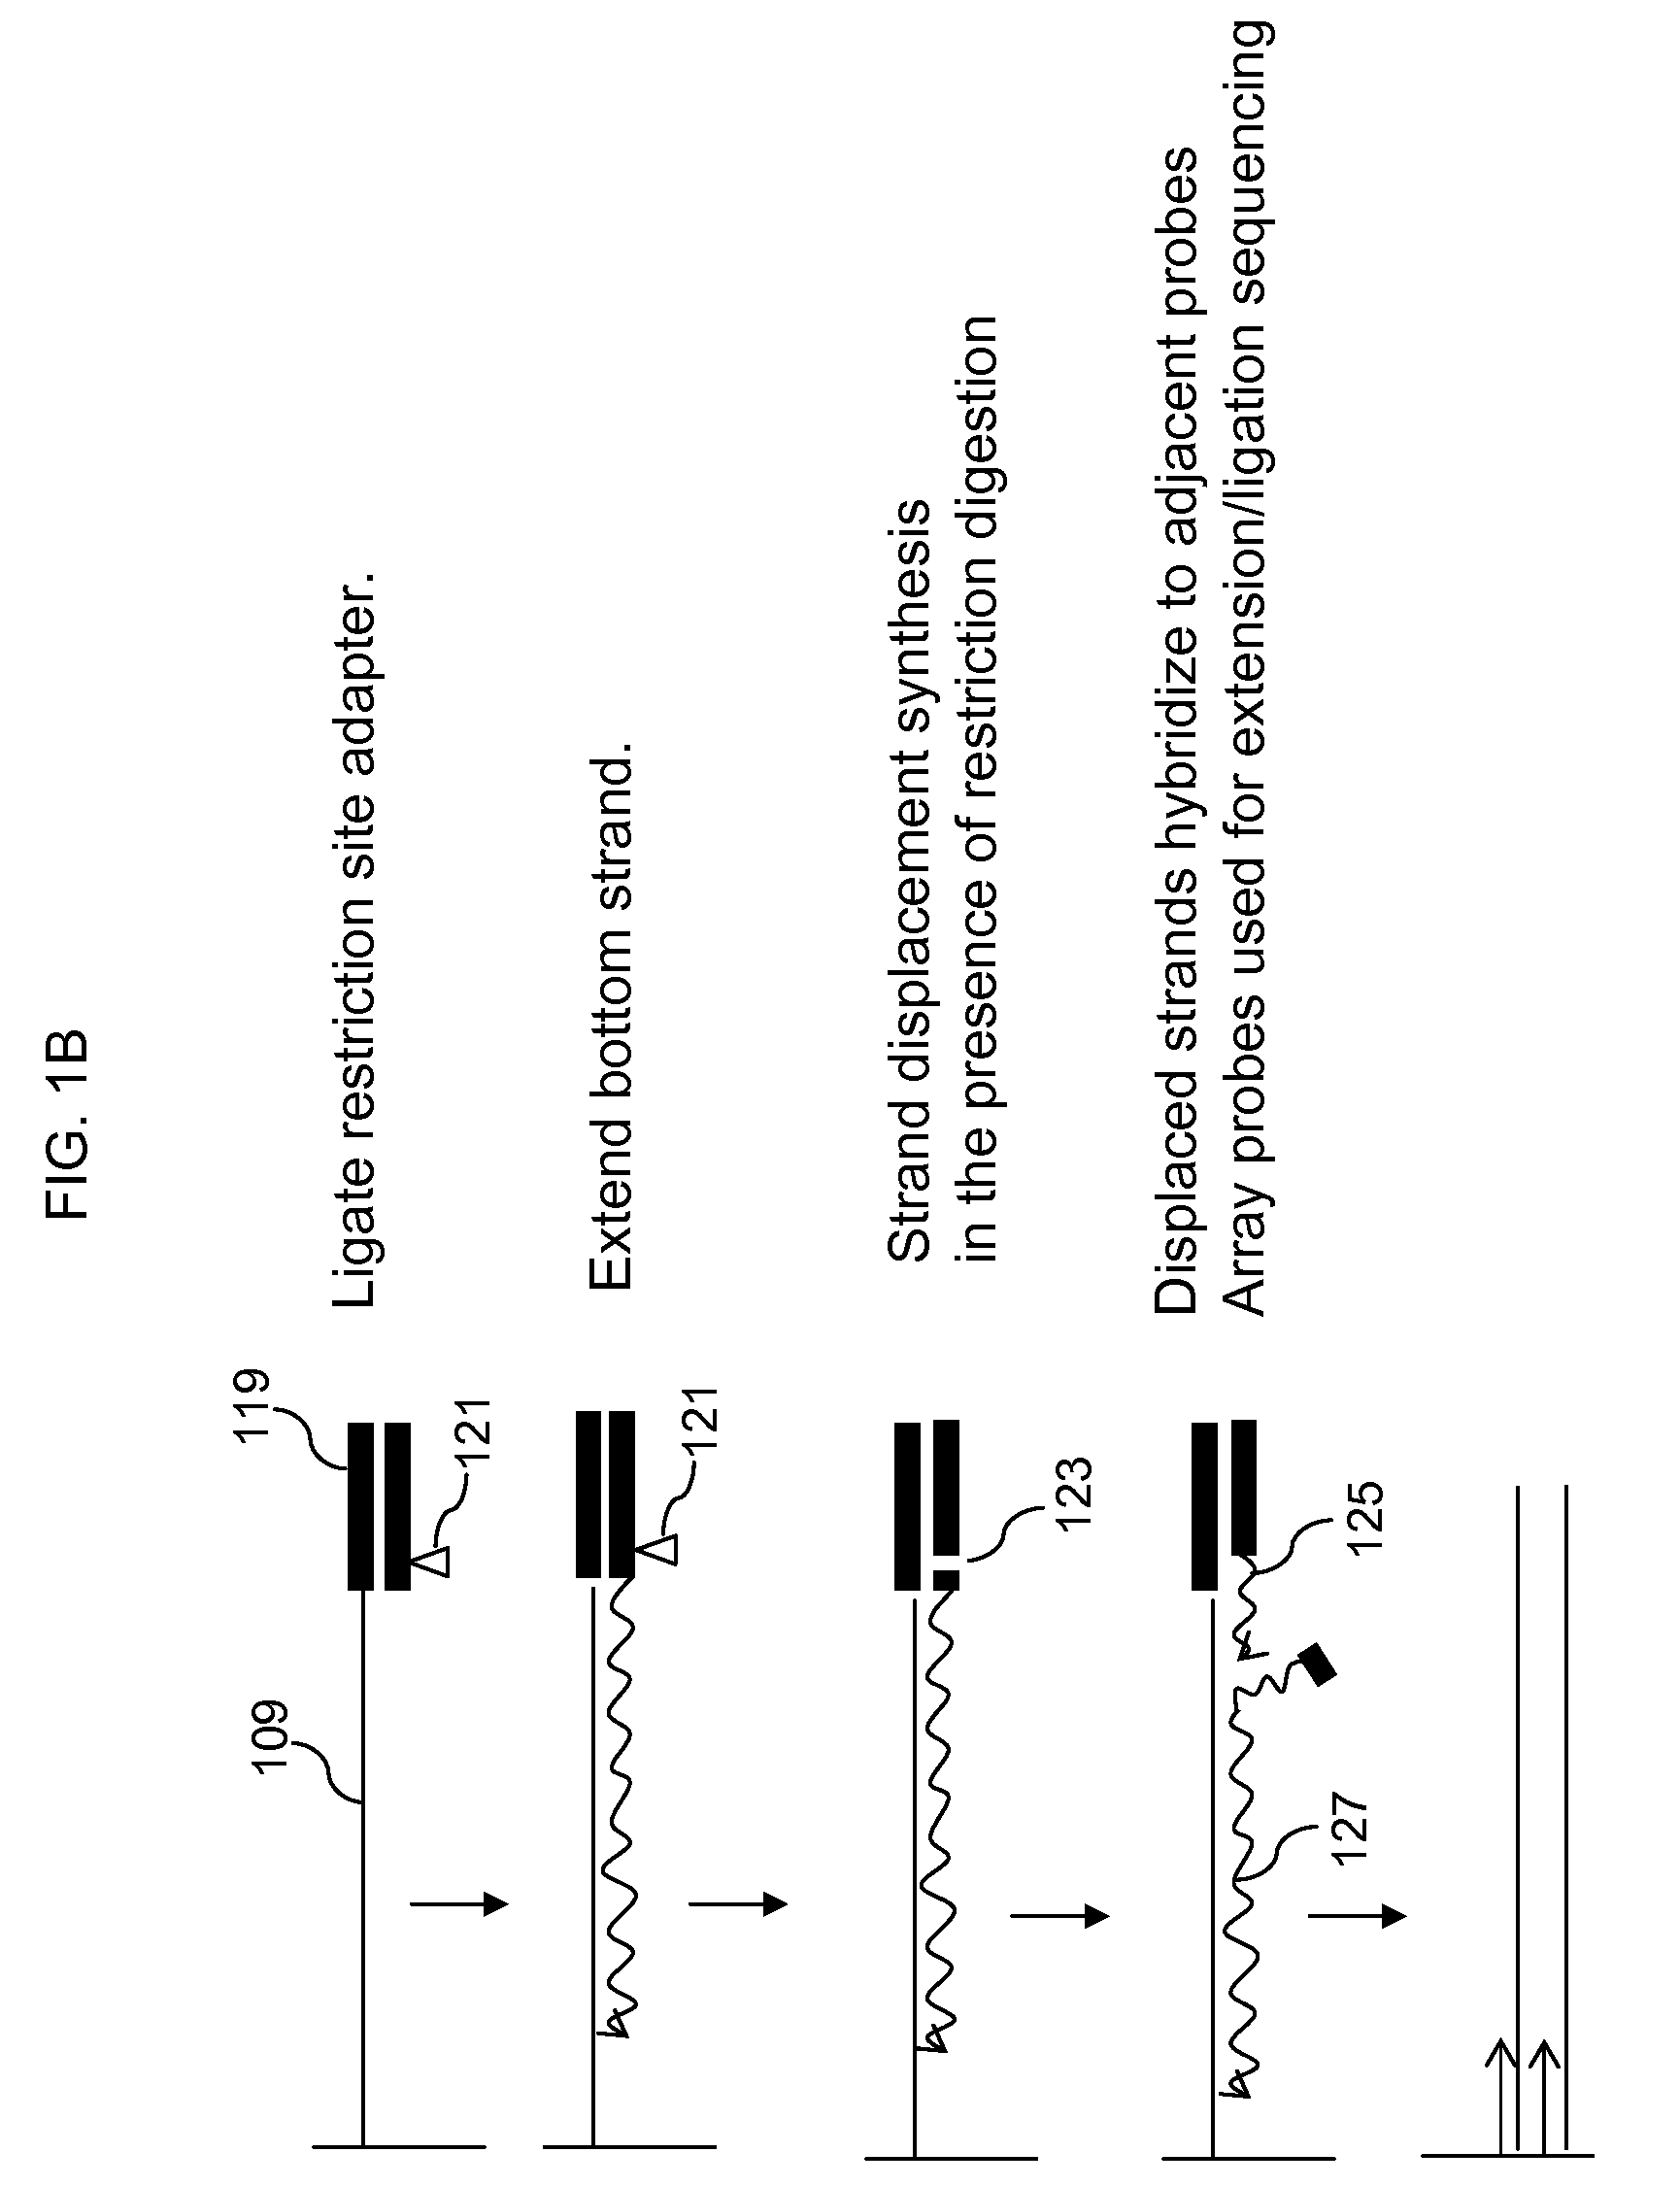 Locus specific amplification using array probes